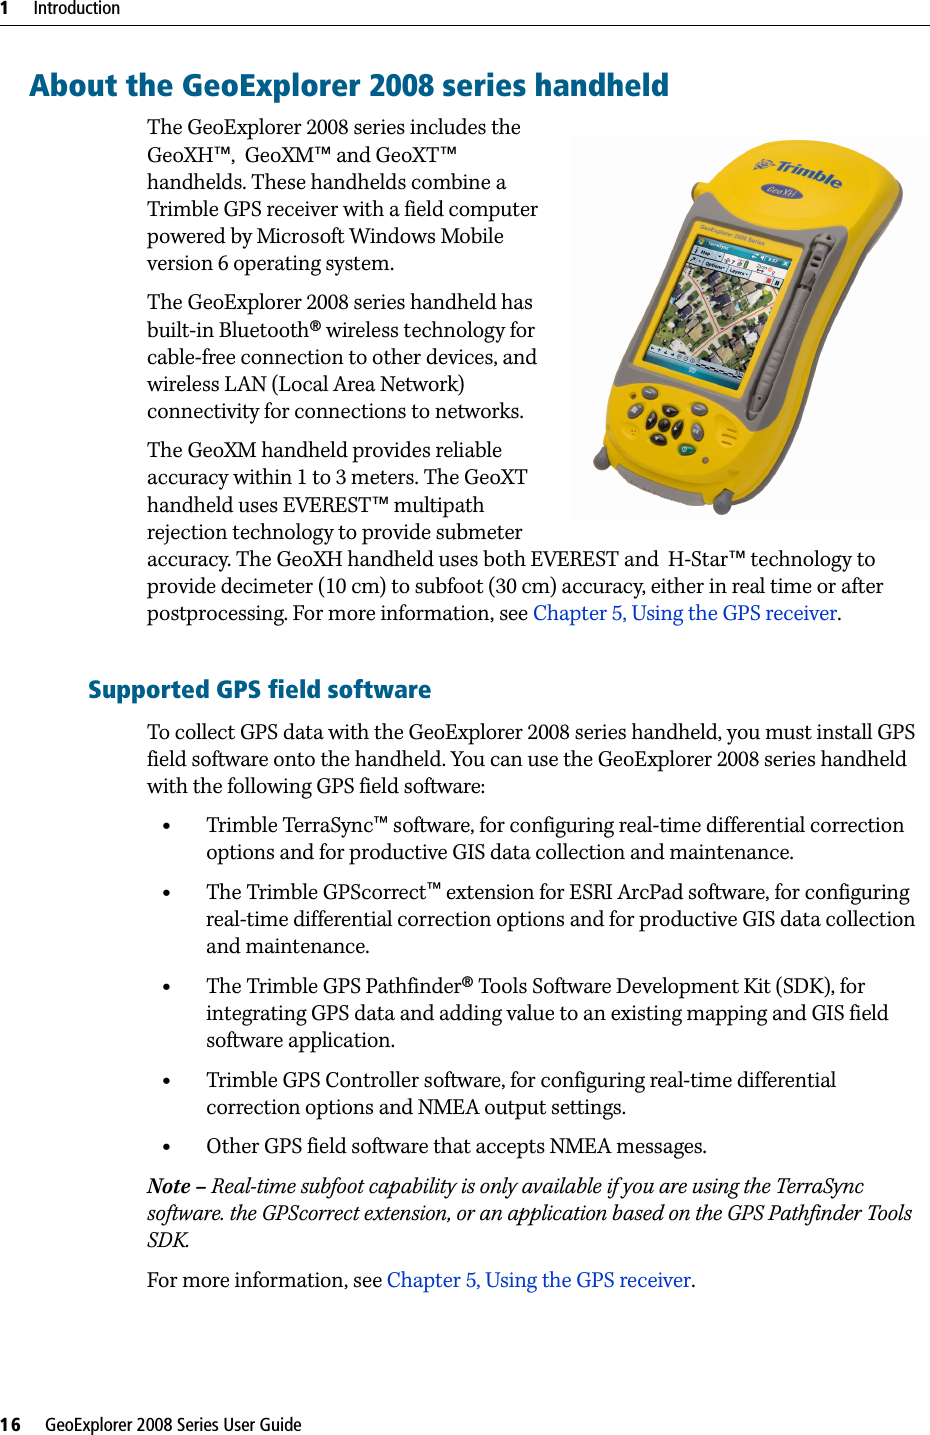 1     Introduction16     GeoExplorer 2008 Series User GuideAbout the GeoExplorer 2008 series handheldThe GeoExplorer 2008 series includes the GeoXH™,  GeoXM™ and GeoXT™ handhelds. These handhelds combine a Trimble GPS receiver with a field computer powered by Microsoft Windows Mobile version 6 operating system. The GeoExplorer 2008 series handheld has built-in Bluetooth® wireless technology for cable-free connection to other devices, and wireless LAN (Local Area Network) connectivity for connections to networks. The GeoXM handheld provides reliable accuracy within 1 to 3 meters. The GeoXT handheld uses EVEREST™ multipath rejection technology to provide submeter accuracy. The GeoXH handheld uses both EVEREST and  H-Star™ technology to provide decimeter (10 cm) to subfoot (30 cm) accuracy, either in real time or after postprocessing. For more information, see Chapter 5, Using the GPS receiver. Supported GPS field softwareTo collect GPS data with the GeoExplorer 2008 series handheld, you must install GPS field software onto the handheld. You can use the GeoExplorer 2008 series handheld with the following GPS field software:•Trimble TerraSync™ software, for configuring real-time differential correction options and for productive GIS data collection and maintenance.•The Trimble GPScorrect™ extension for ESRI ArcPad software, for configuring real-time differential correction options and for productive GIS data collection and maintenance.•The Trimble GPS Pathfinder® Tools Software Development Kit (SDK), for integrating GPS data and adding value to an existing mapping and GIS field software application.•Trimble GPS Controller software, for configuring real-time differential correction options and NMEA output settings.•Other GPS field software that accepts NMEA messages.Note – Real-time subfoot capability is only available if you are using the TerraSync software. the GPScorrect extension, or an application based on the GPS Pathfinder Tools SDK.For more information, see Chapter 5, Using the GPS receiver.